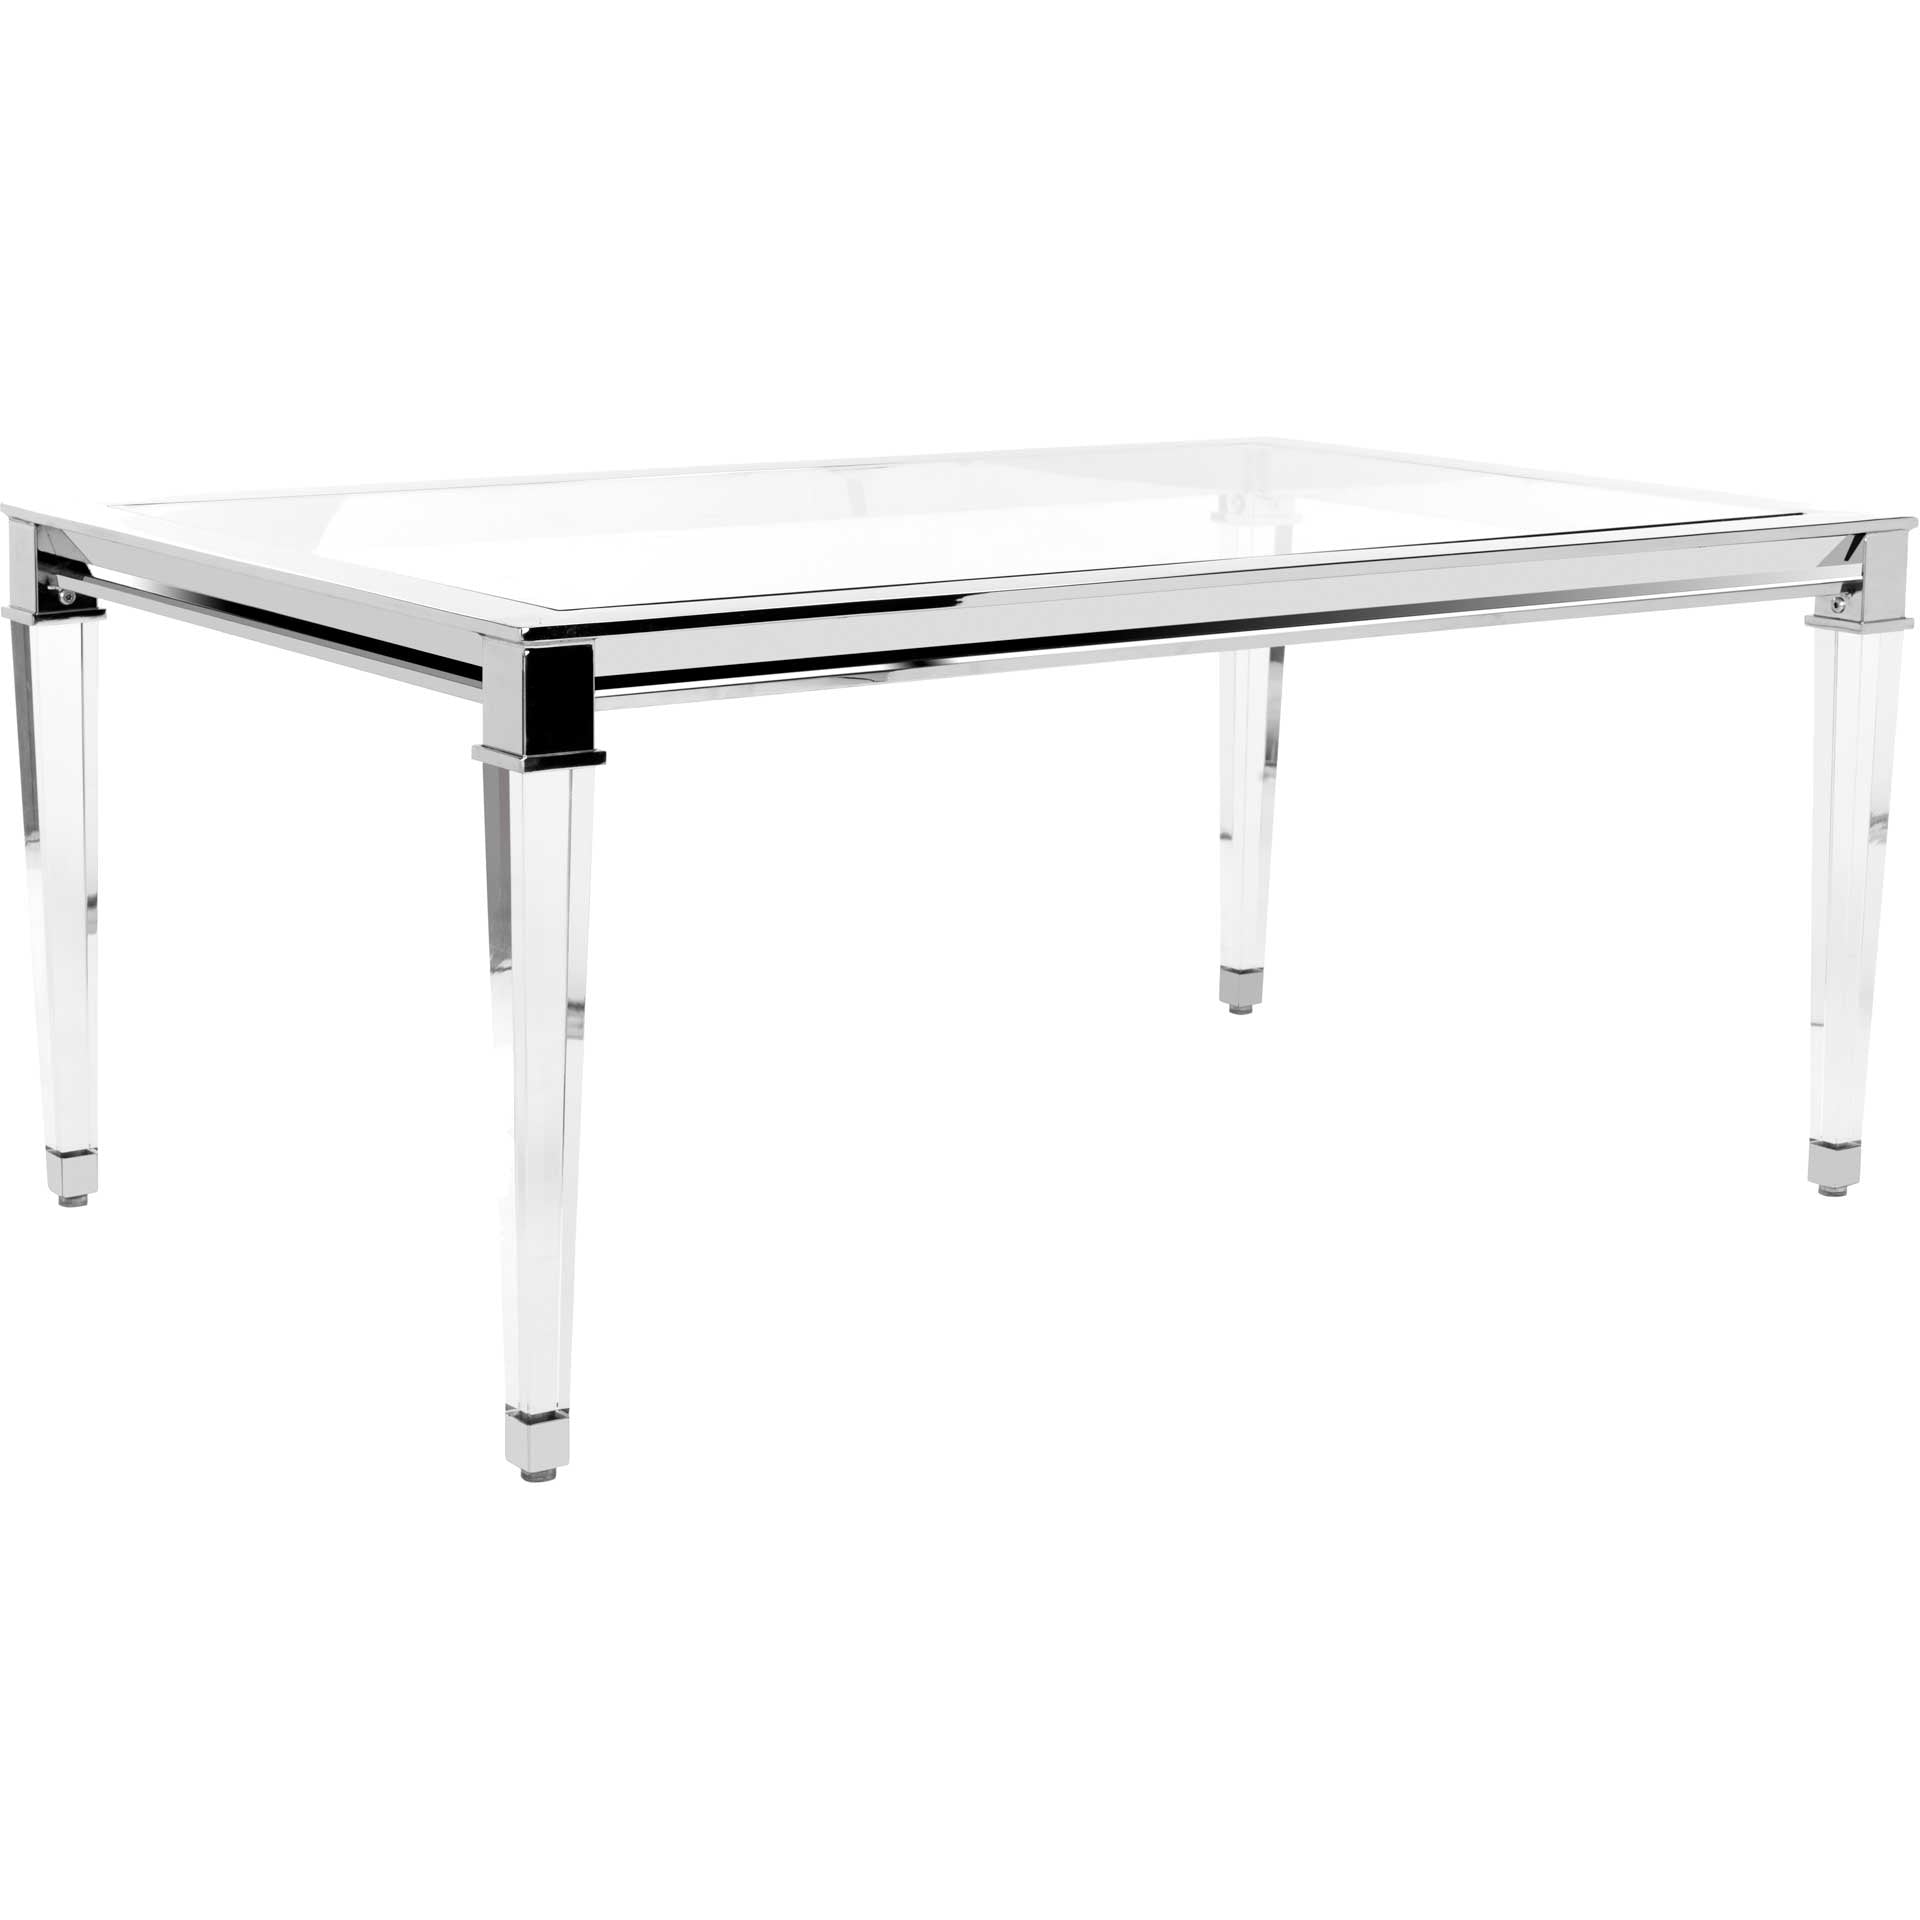 Channing Acrylic Coffee Table Silver